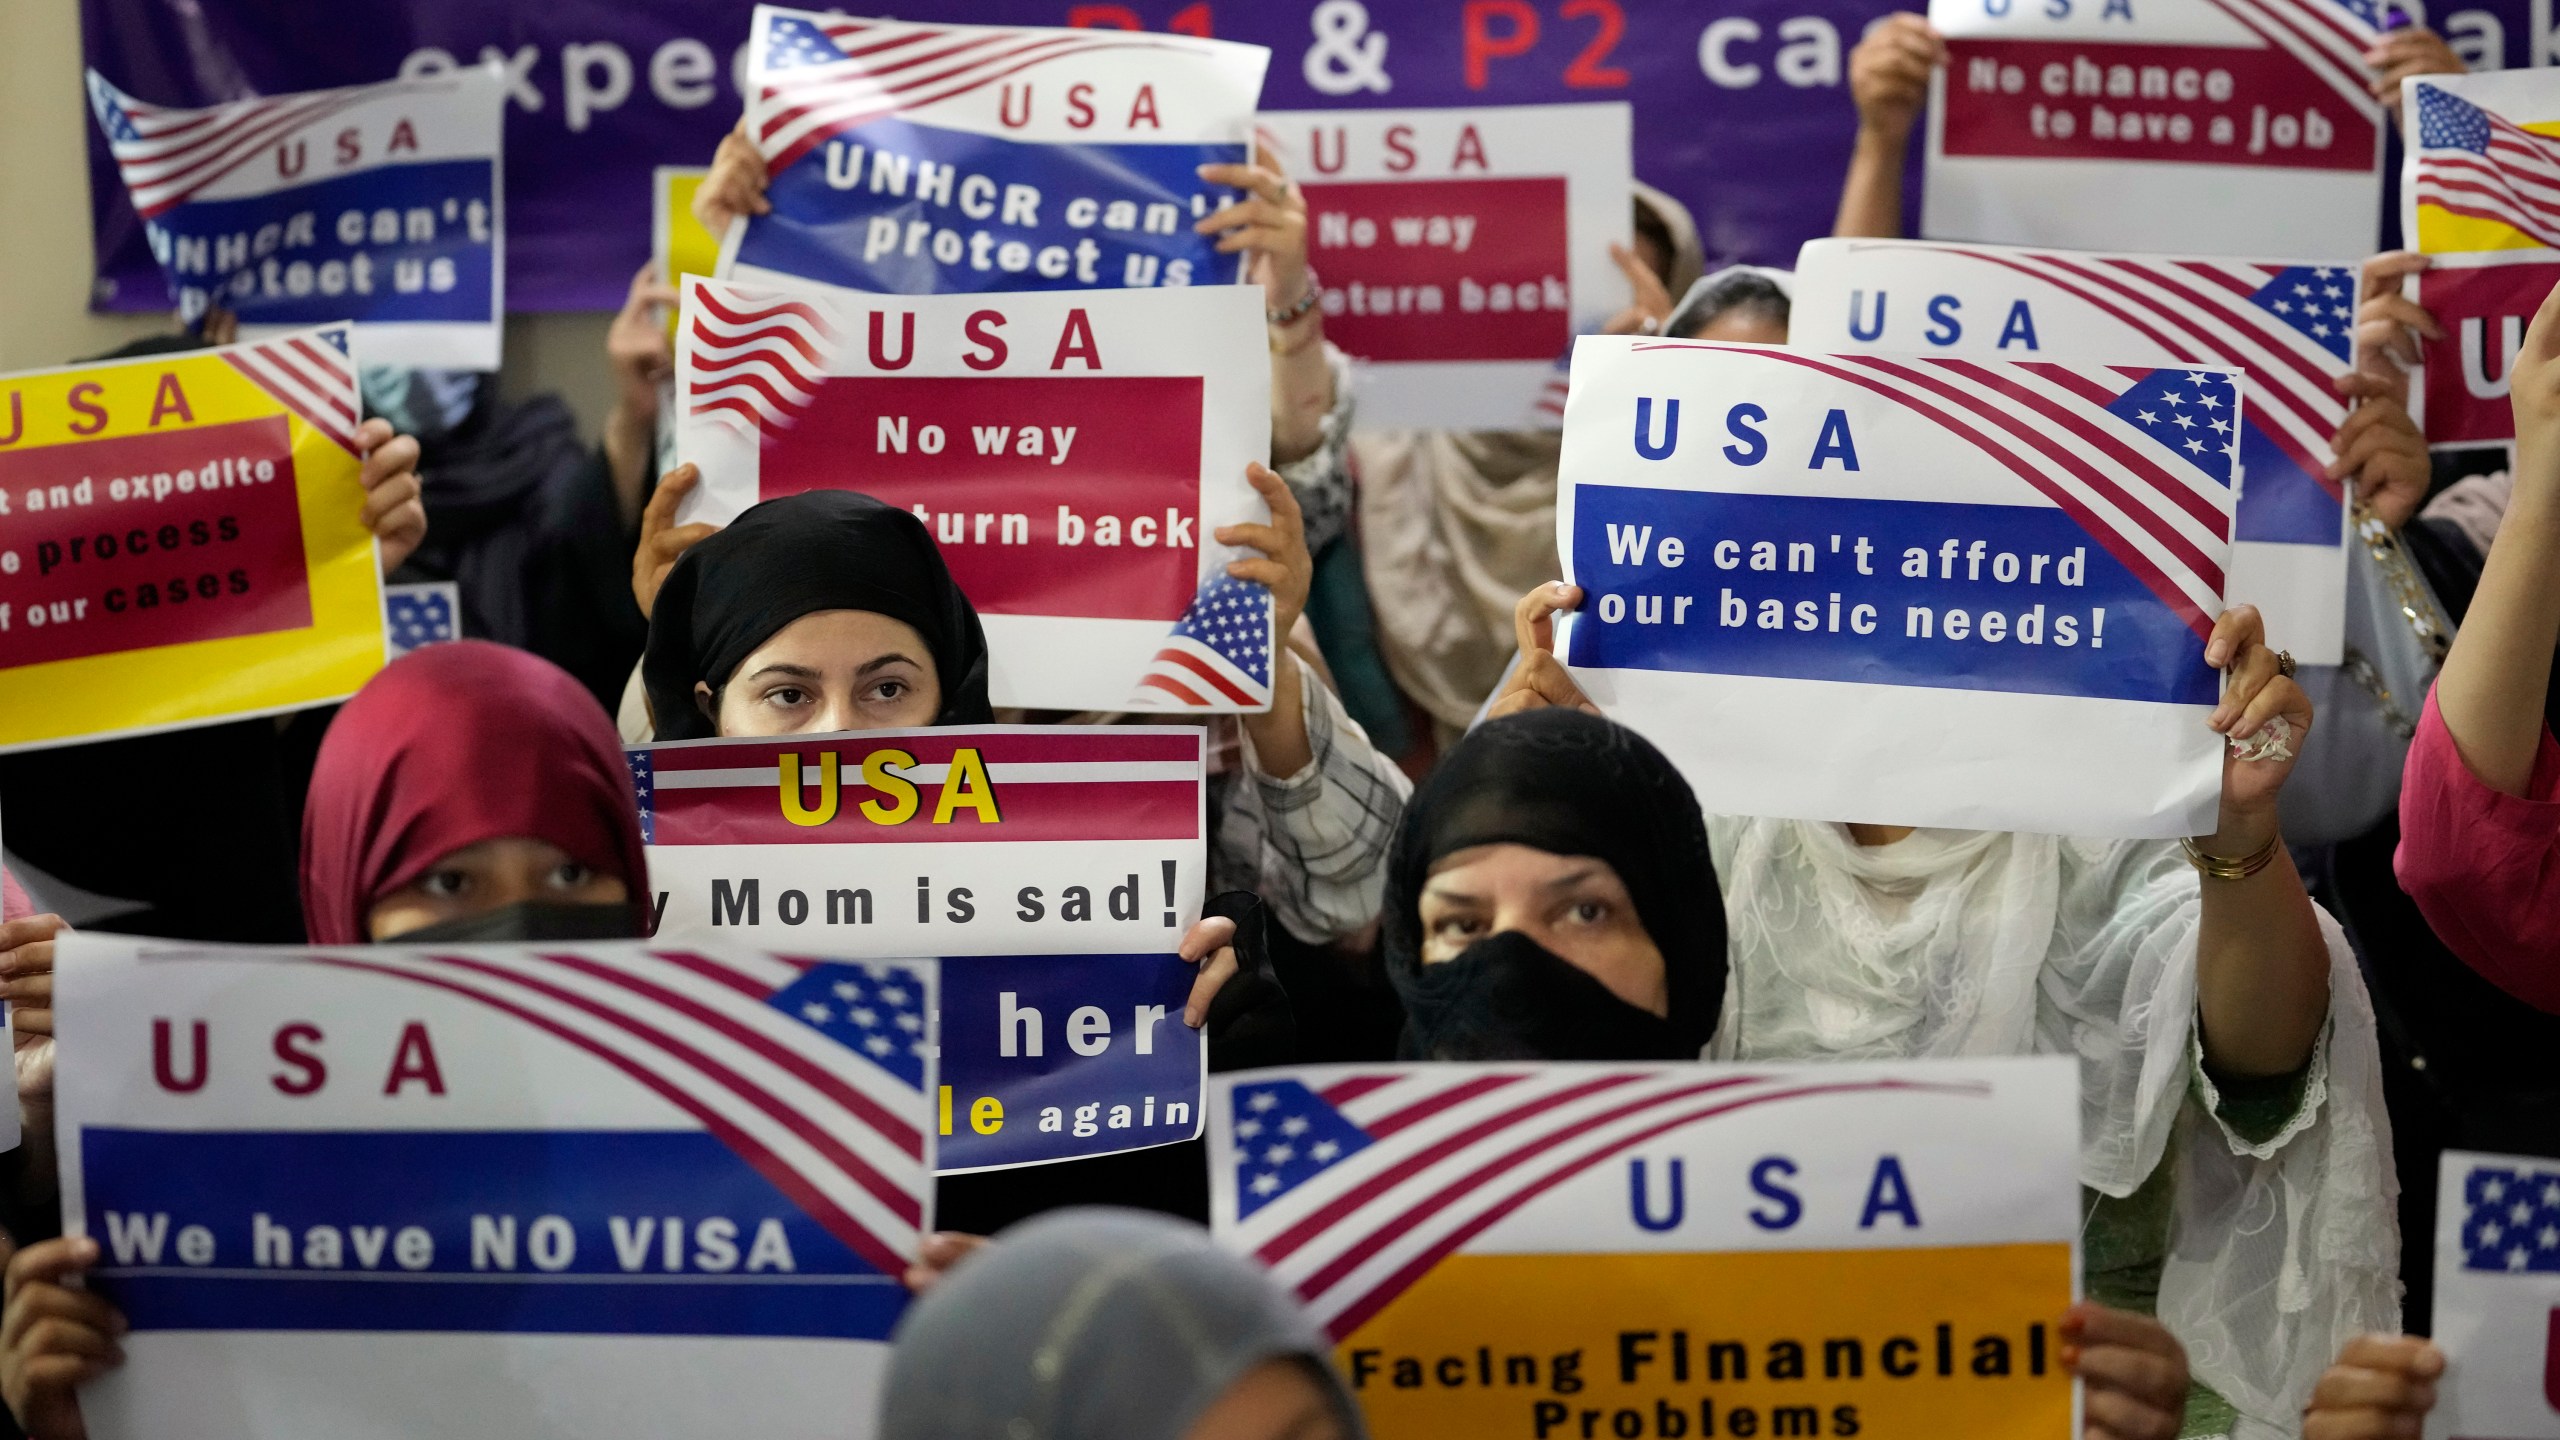 FILE - Afghan refugees hold placards during a gathering in Islamabad, Pakistan, July 21, 2023. Senators from both parties are urging congressional leaders to ensure that more visas are made available to Afghans who worked alongside U.S. troops in America's longest war. The senators say an additional 20,000 visas are needed before the end of the fiscal year in September. (AP Photo/Rahmat Gul, File)